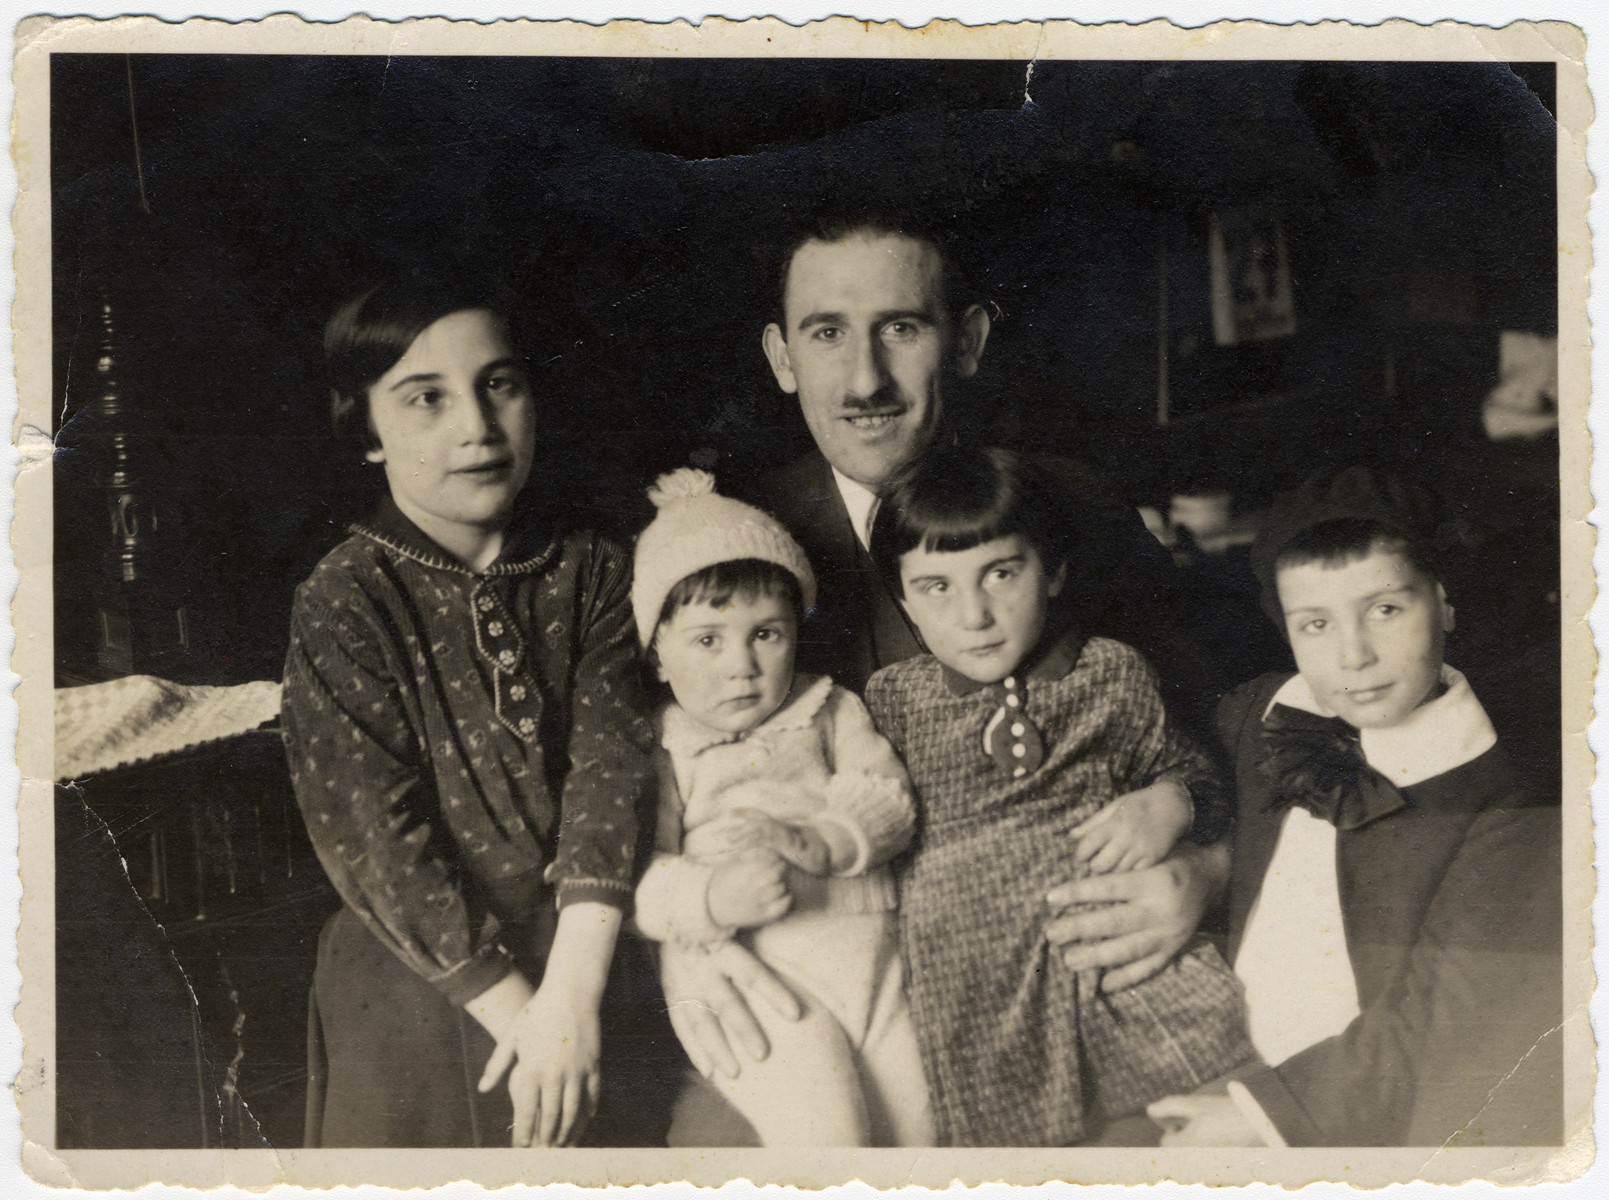 Simon Bloch poses with his four children gathered around him.

From left to right: Lore (later Schwab), Julius Israel, the father Simon Bloch, Margot (later Klein) and Max.  The following year they moved to Strasbourg following the Nazi take-over of Germany.